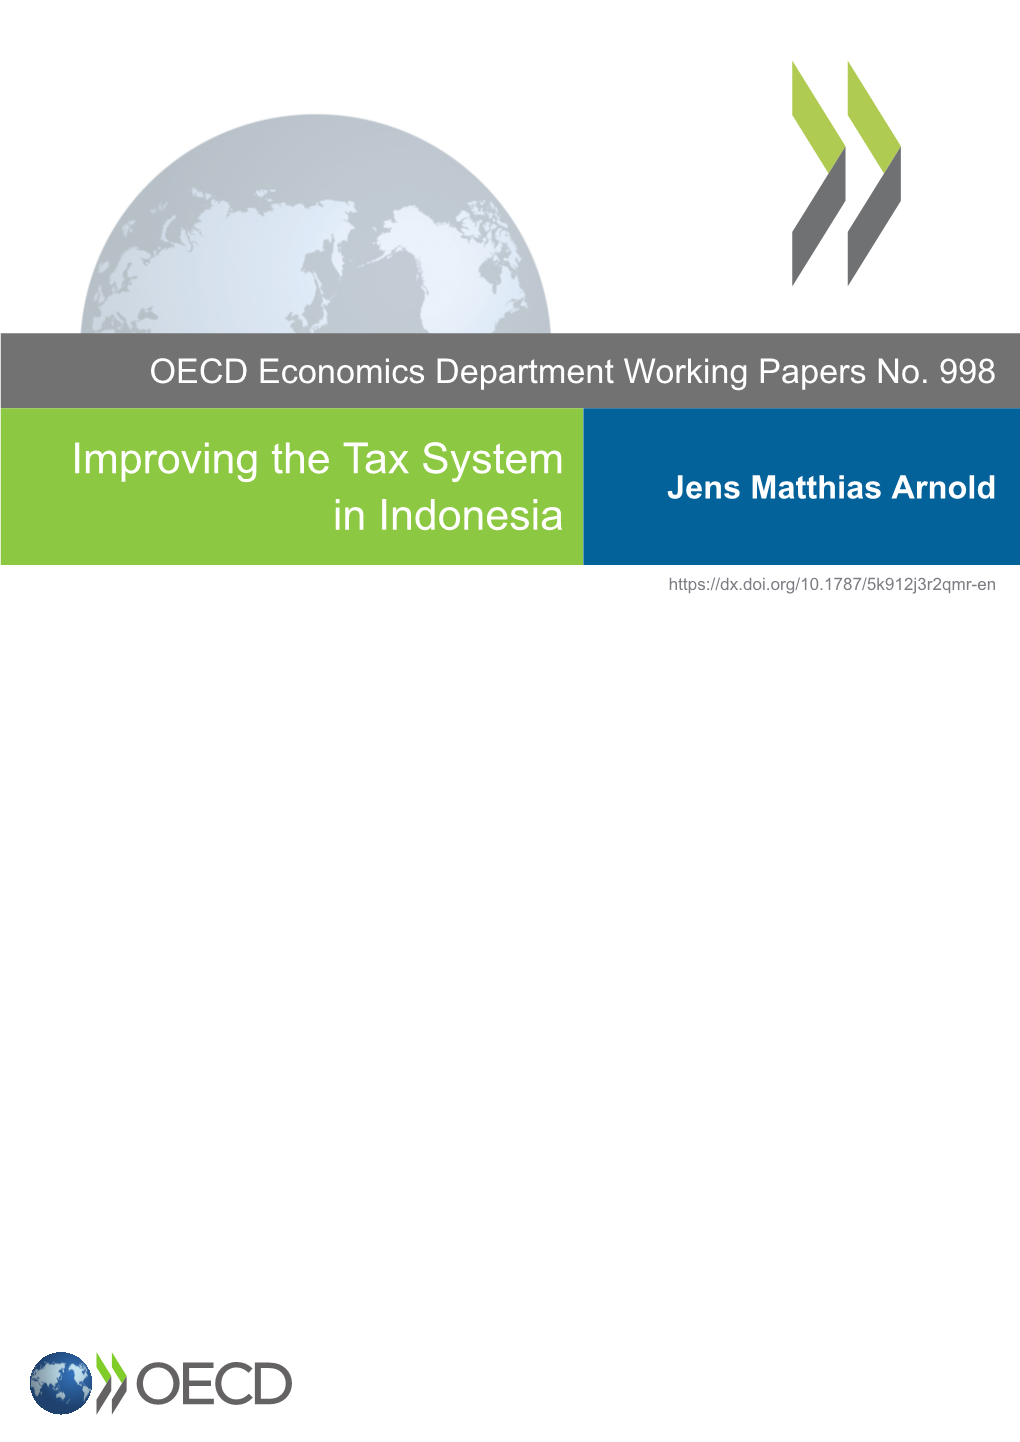 Improving the Tax System in Indonesia